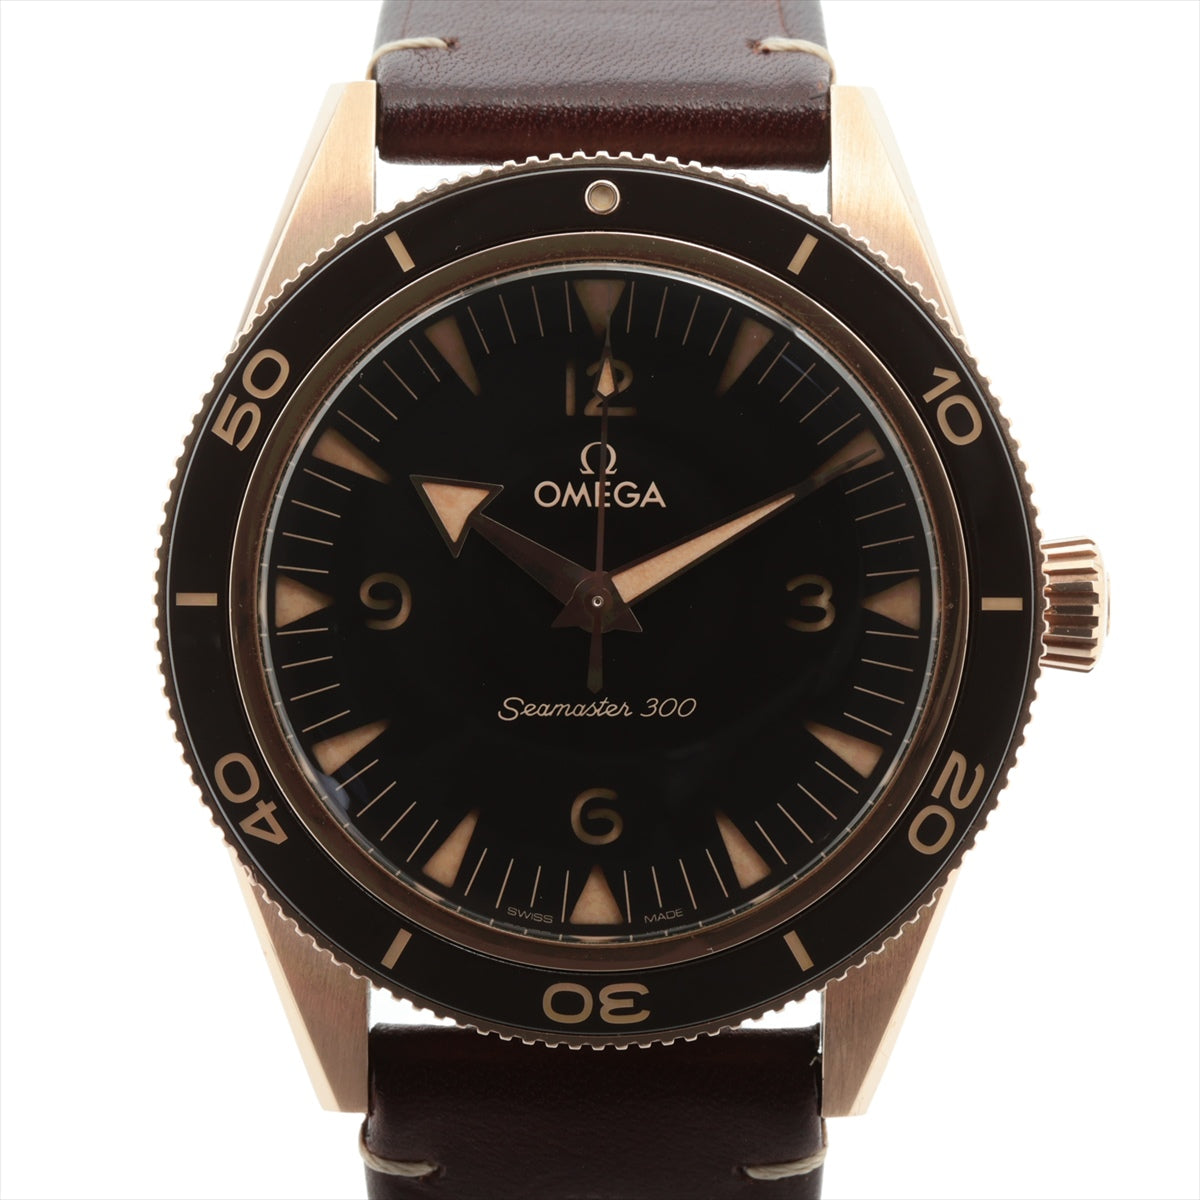 Omega Seamaster 300 Coaxial Master chronometer 234.92.41.21.10.001 375 x leather AT Black-Face